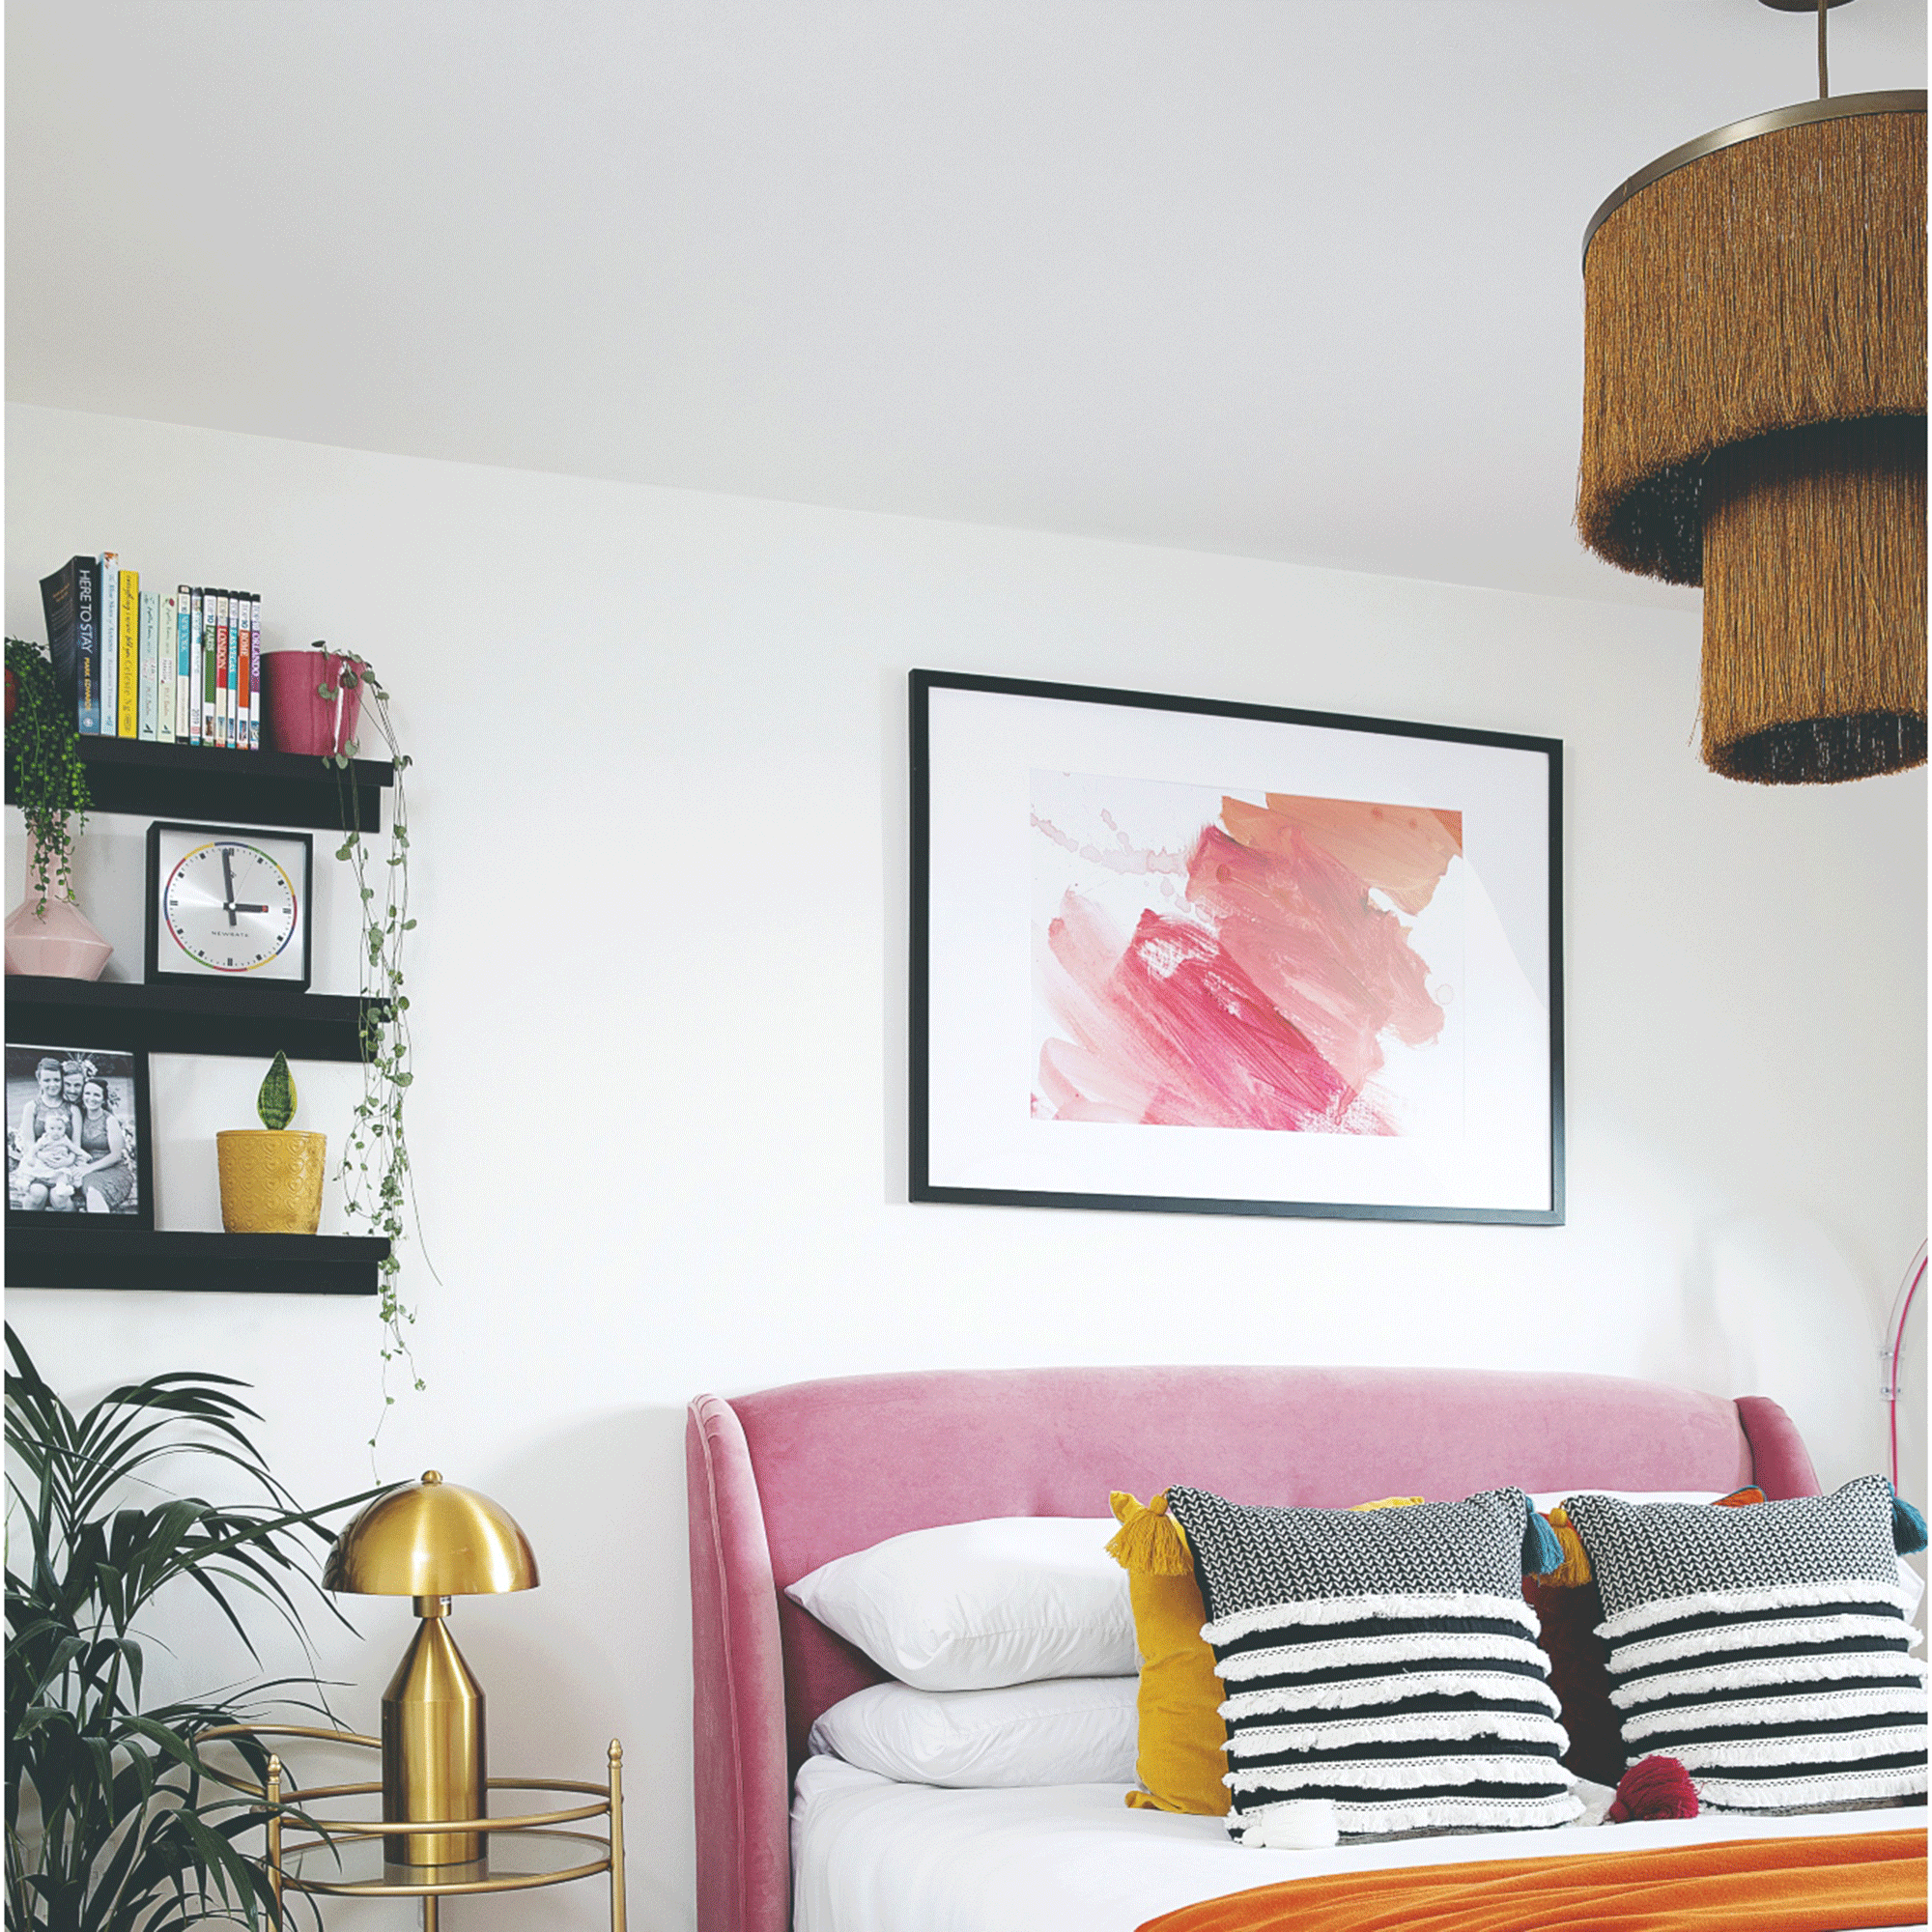 White bedroom with gold fringe lighting and pink bed